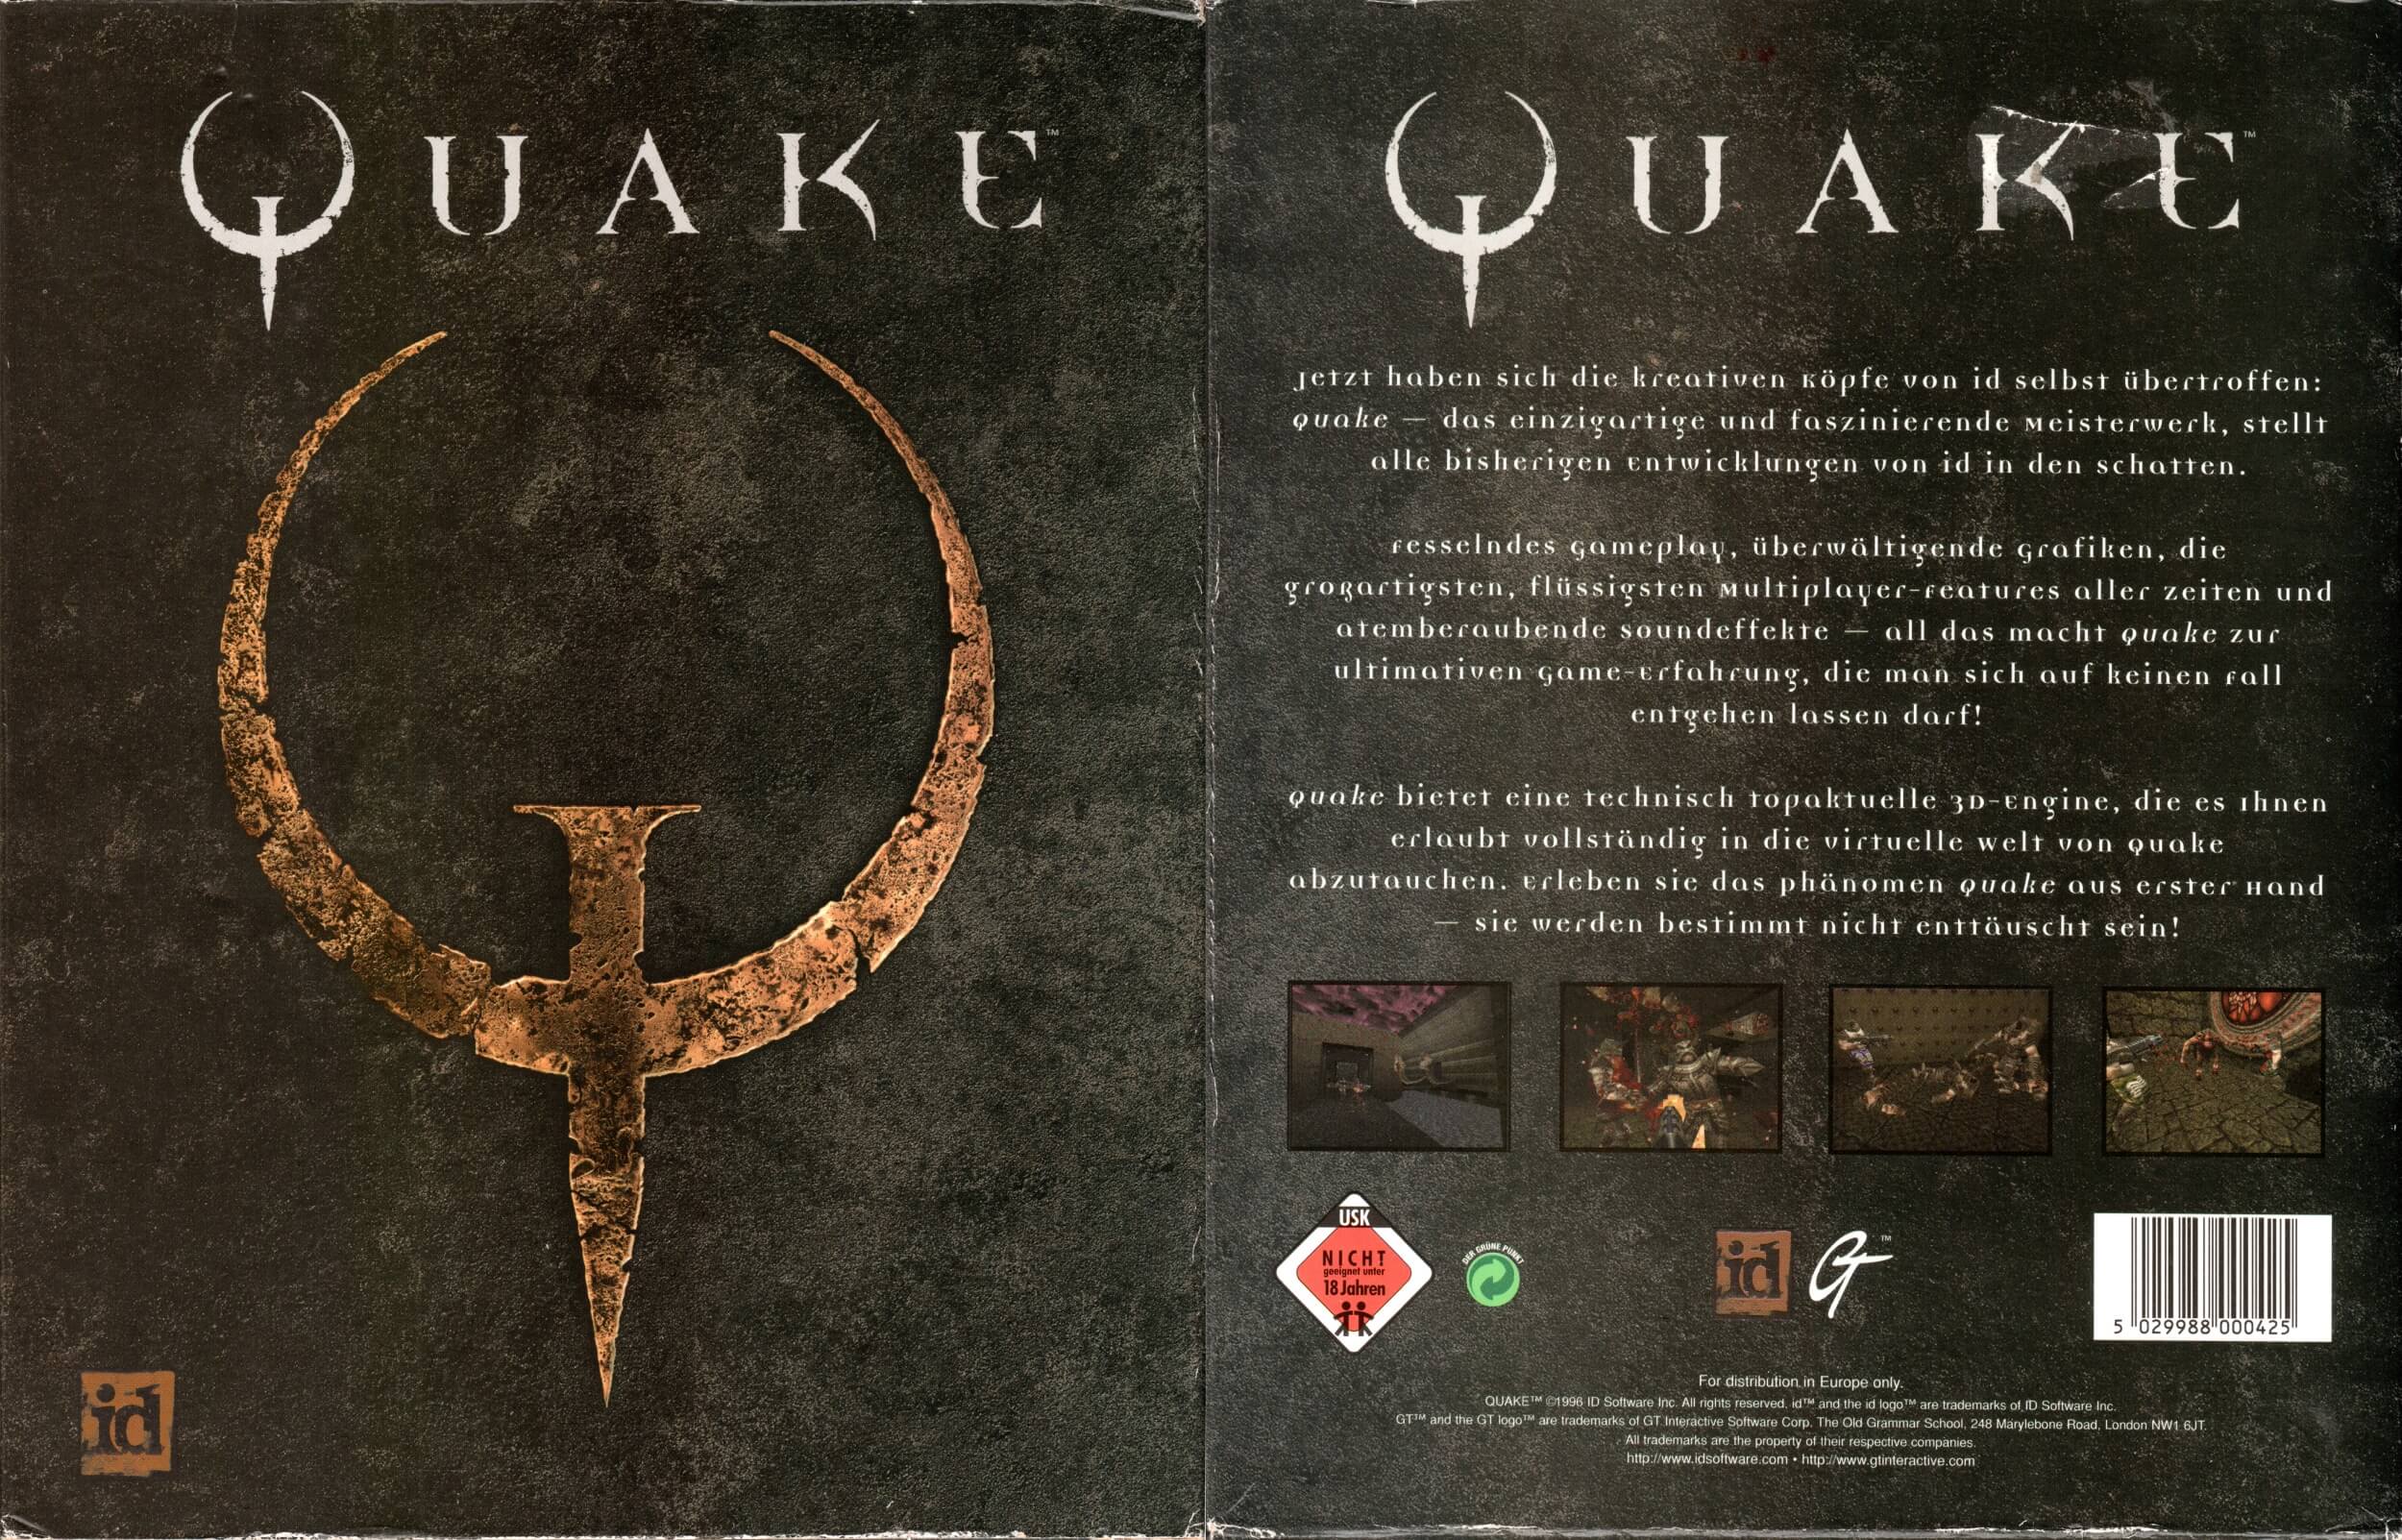 Download your free copy of Quake 1 this weekend courtesy of Bethesda